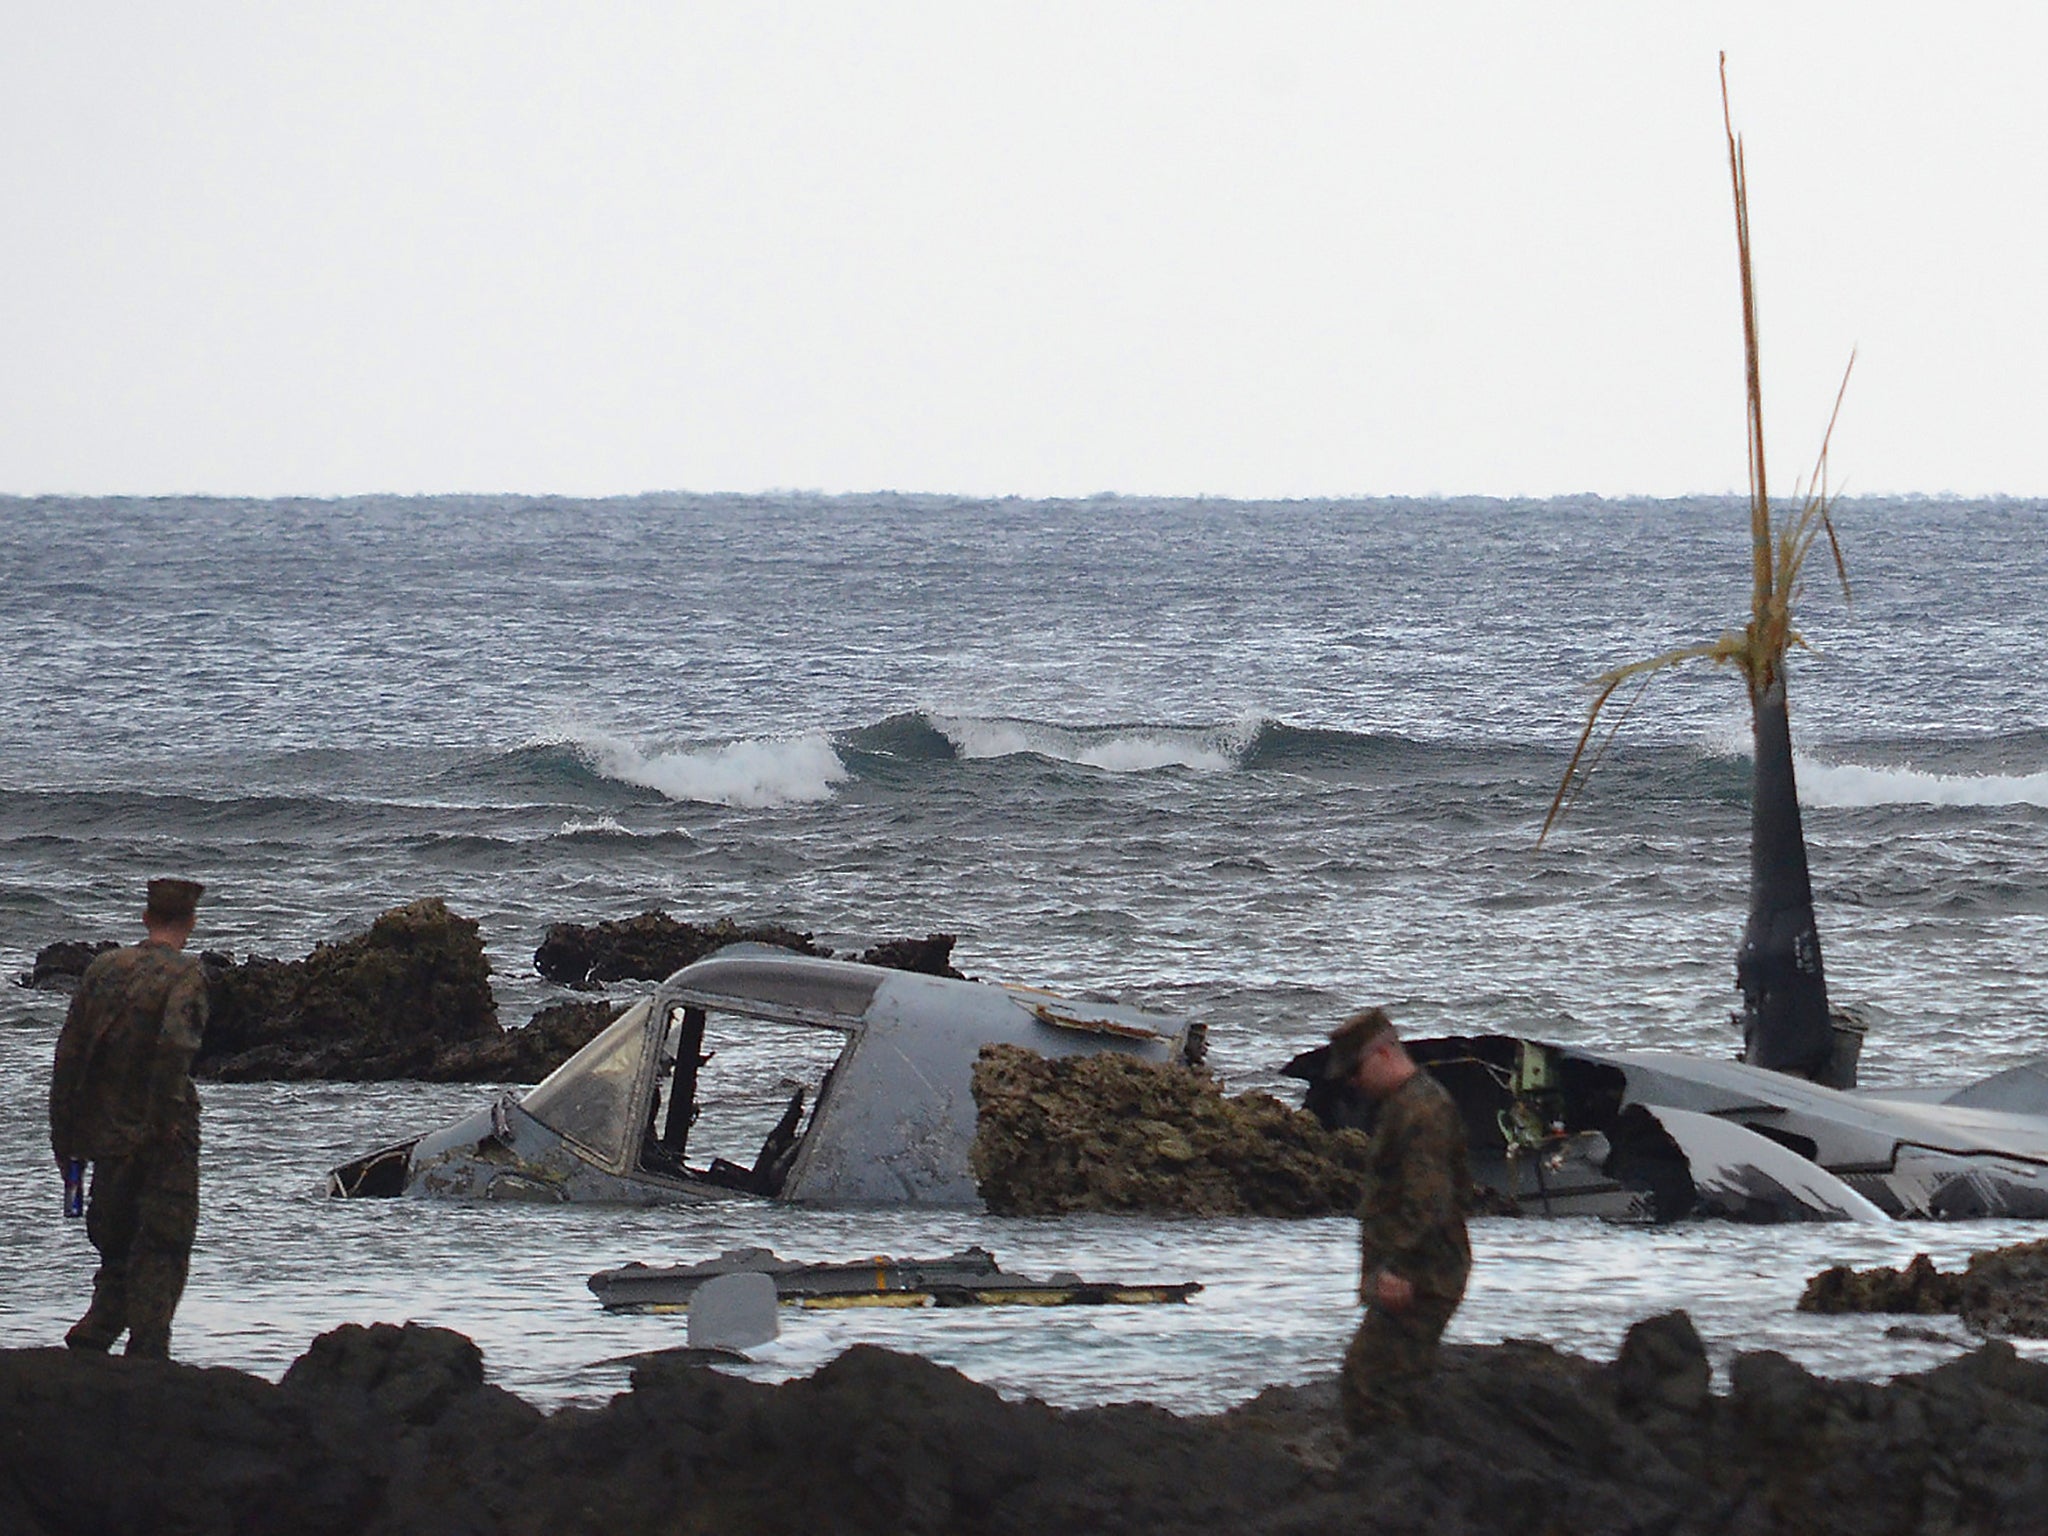 The wreckage of a US Marine MV-22 Osprey tilt-rotor aircraft is seen as the tide recedes on the coast of Nago, Japan's southern island of Okinawa, after it crash landed in shallow waters